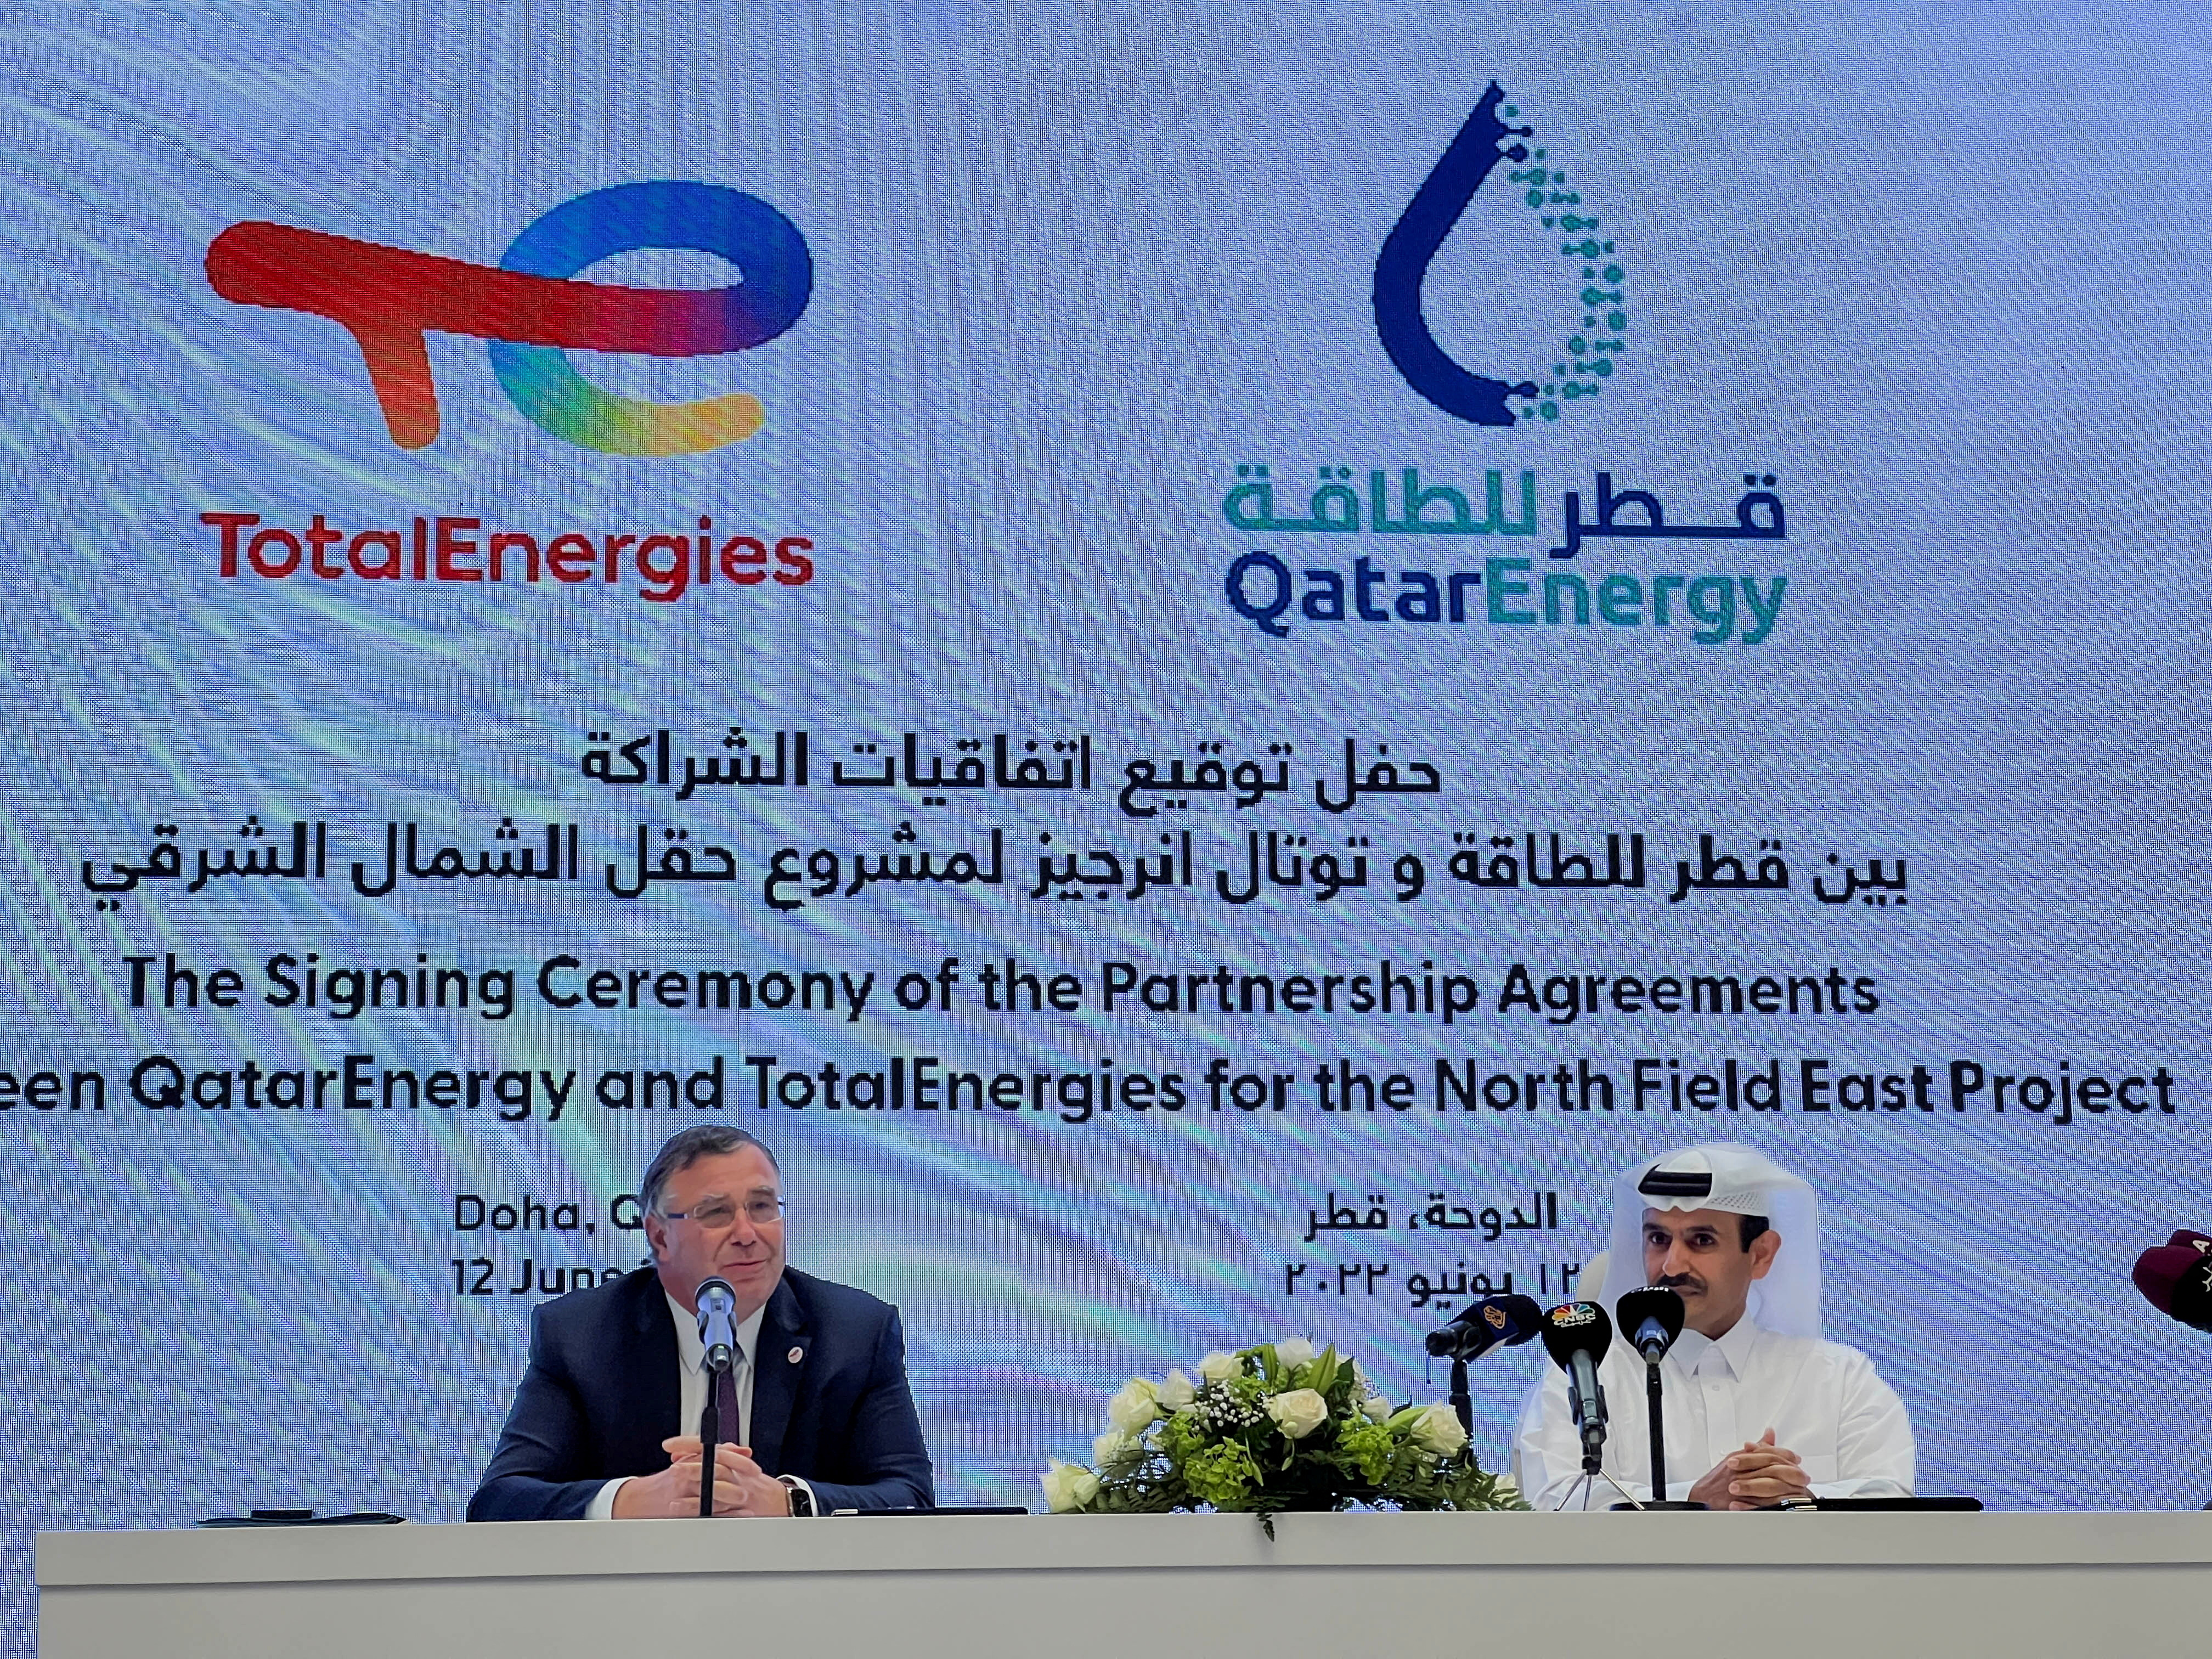 aljazeera.com - French energy giant signs new natural gas deal with Qatar